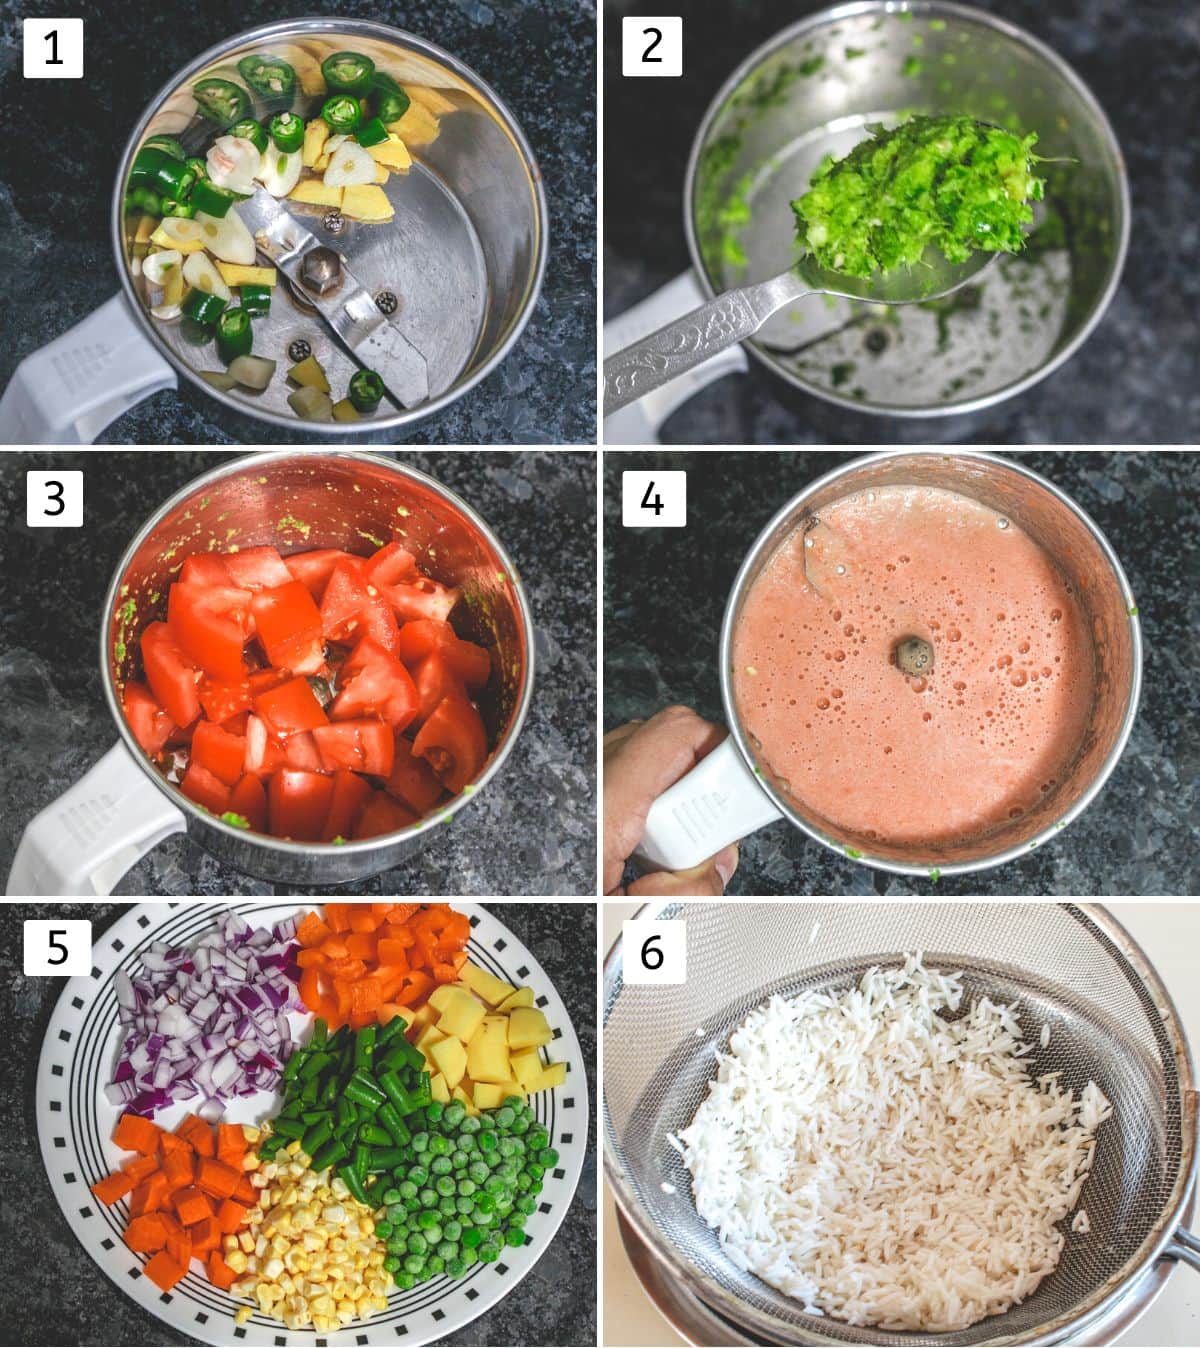 Collage of 6 images showing crushing ginger, garlic, chili, pureeing tomato, veggies in a plate.